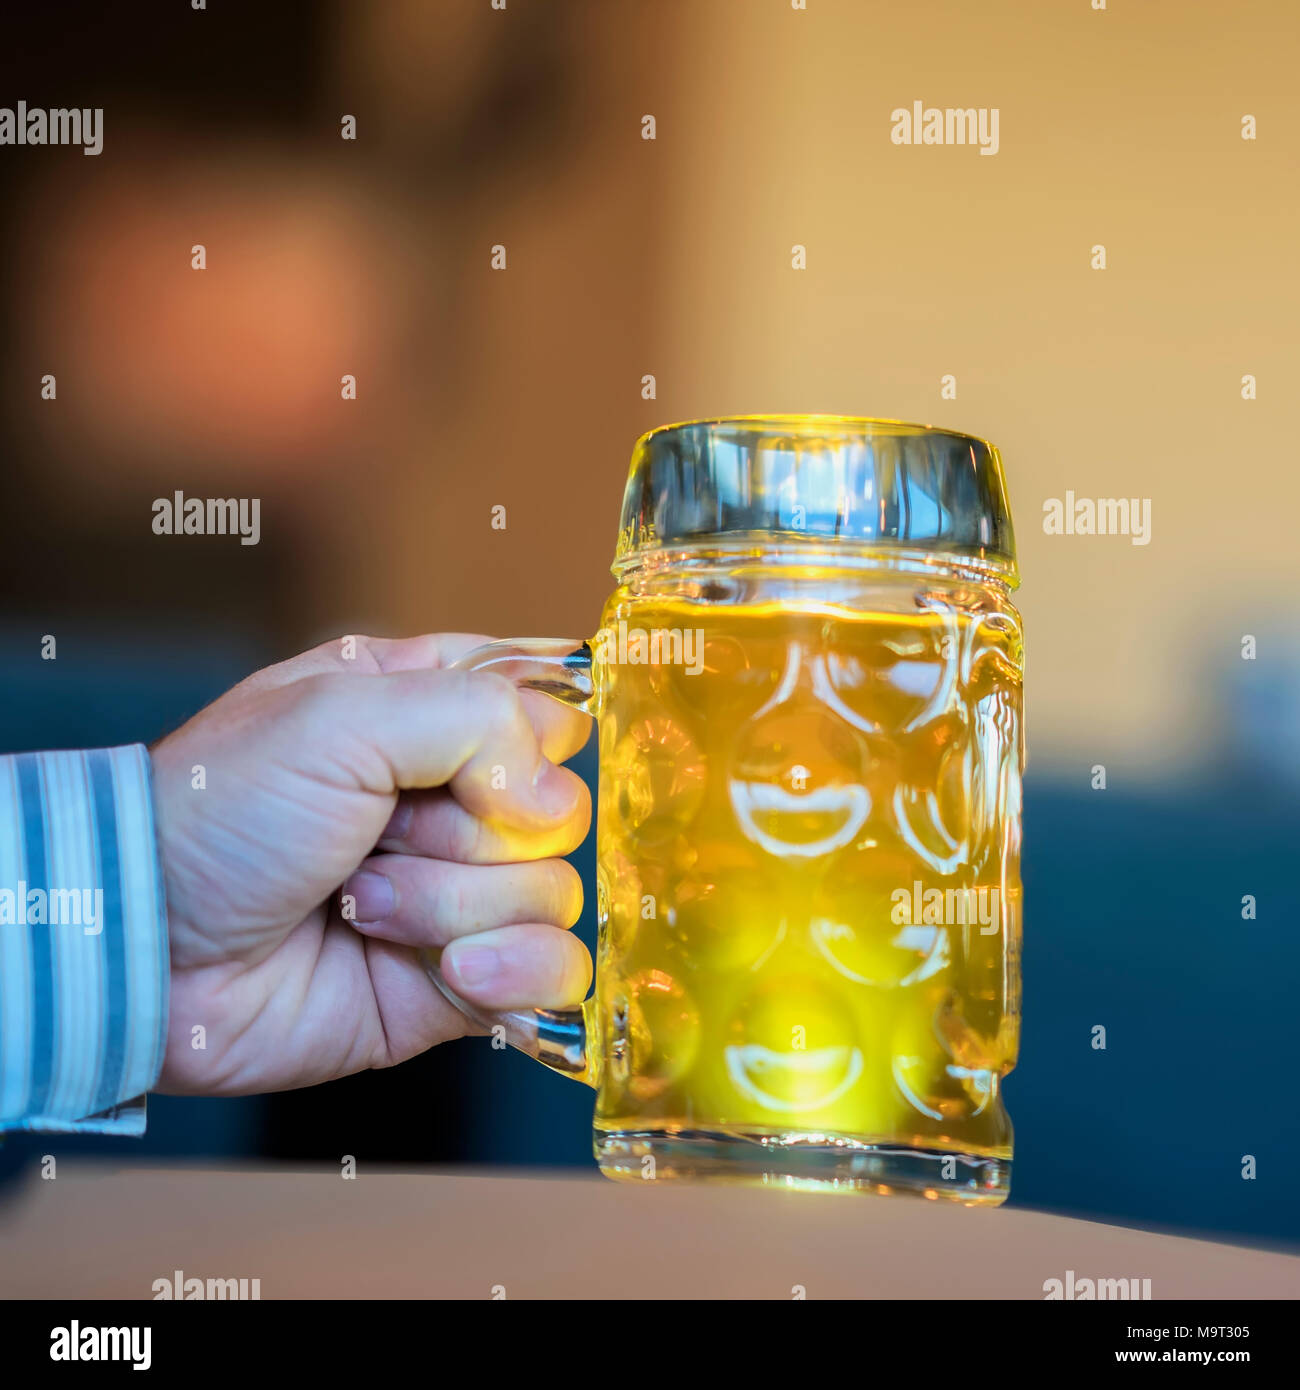 Men Hand with glass mug of golden Freshly filled beer. Real scene in bar, pub. Beer culture, Craft brewery, uniqueness beer grades, meeting of low alcohol beverage lovers Stock Photo